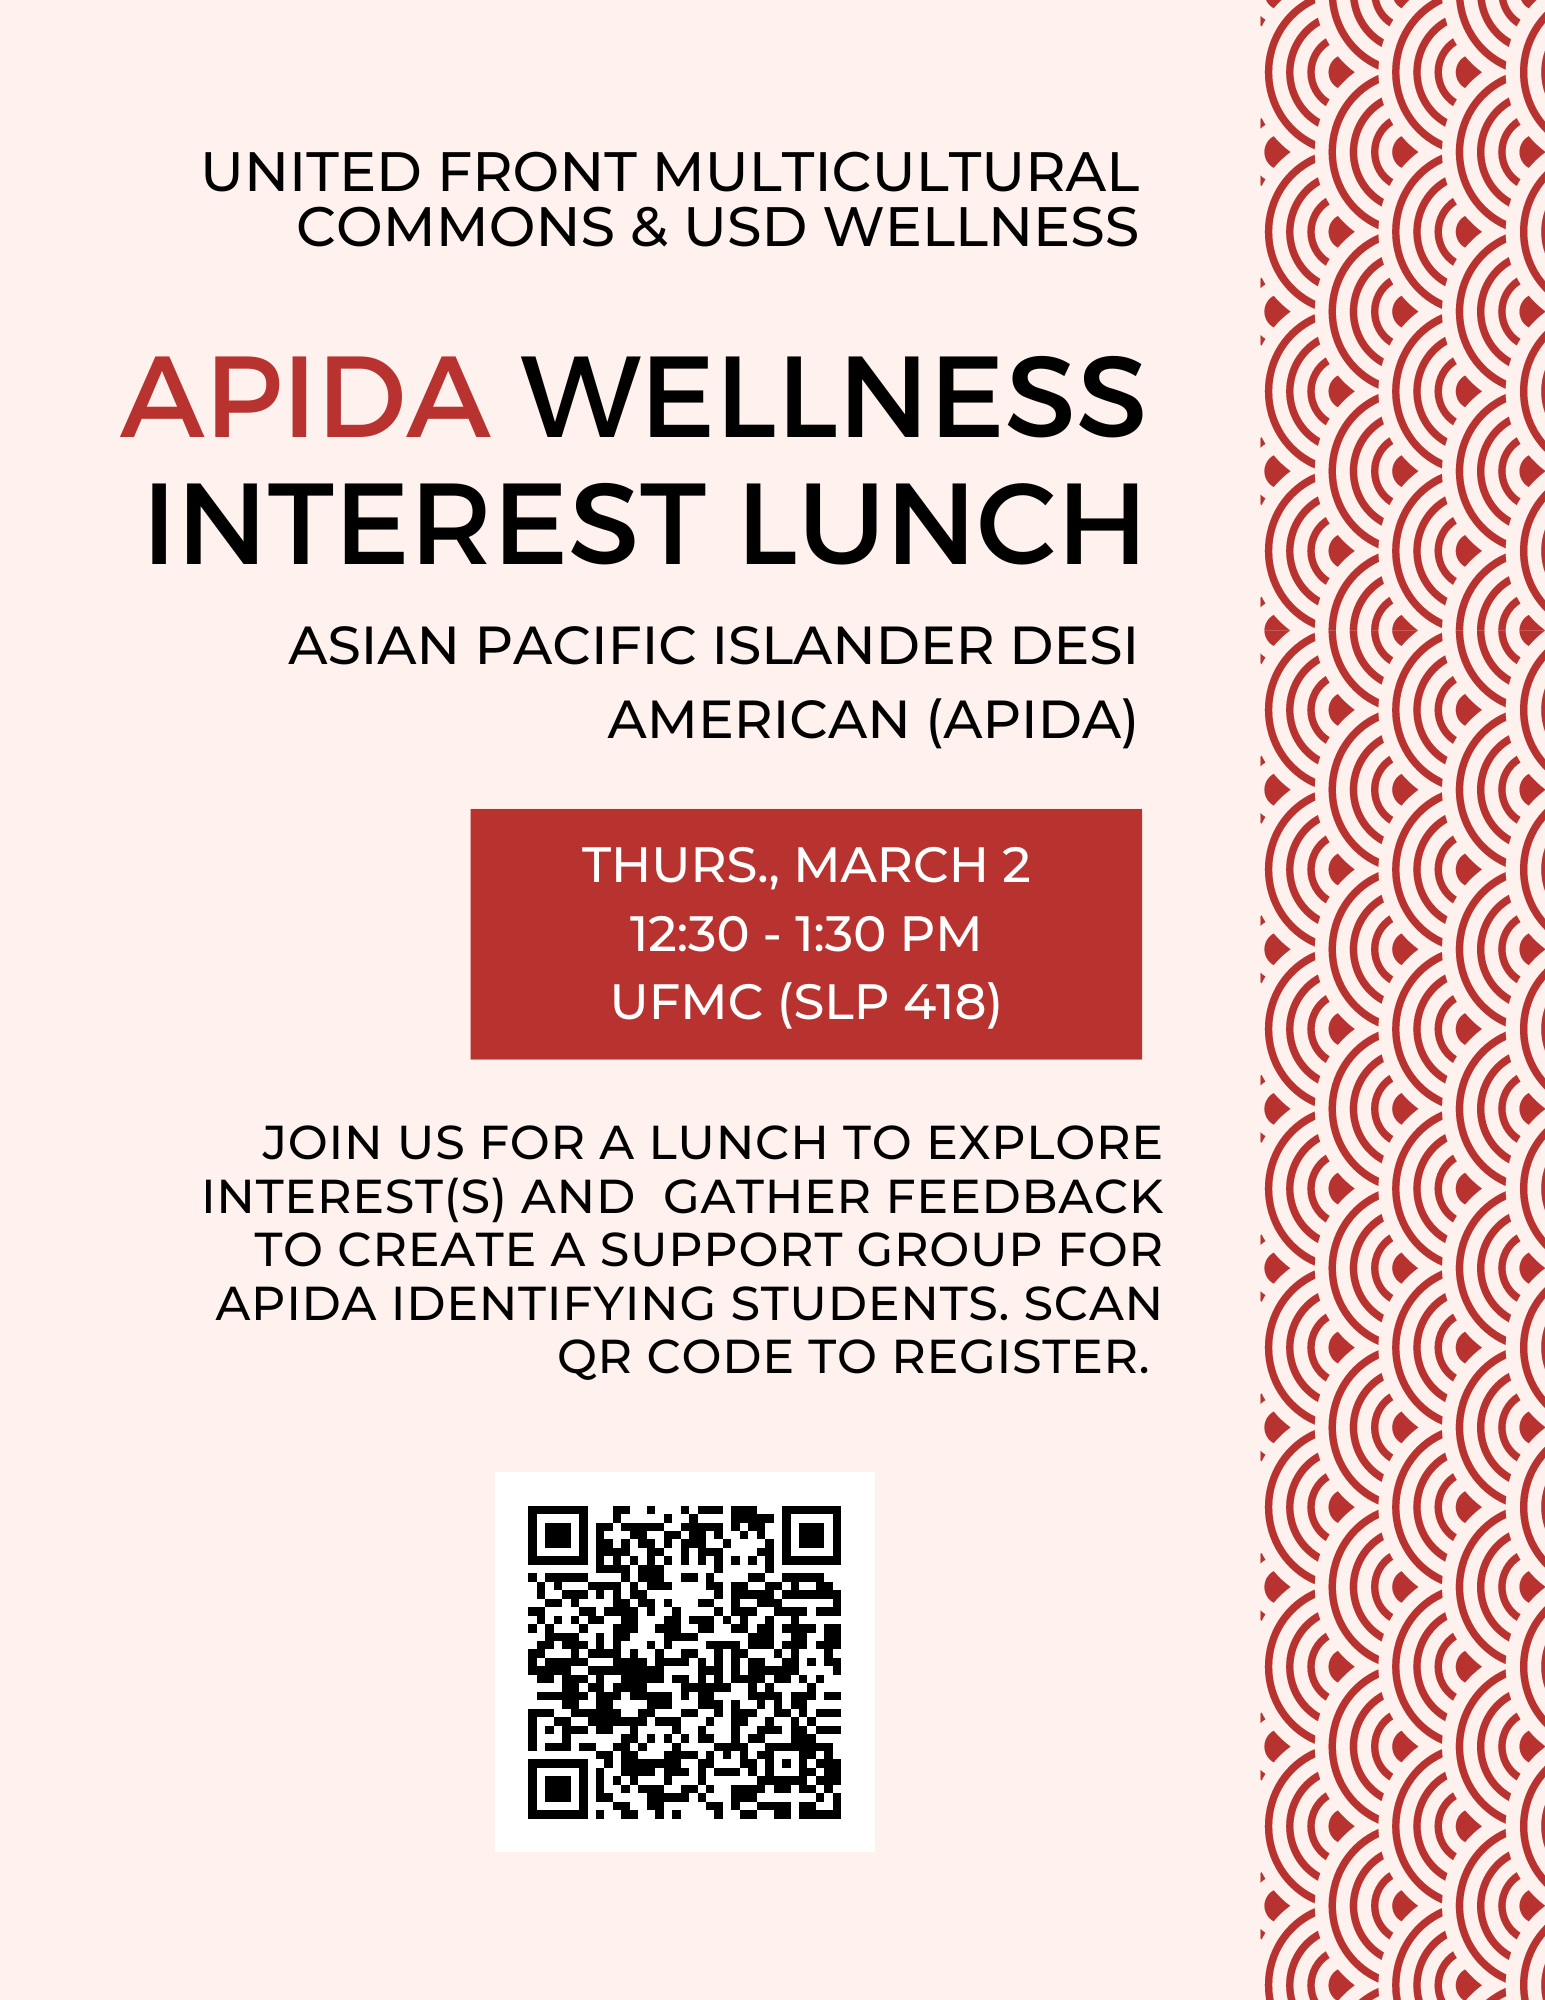 Cream colored flyer with red accents on the right hand side. Flyer promotes APIDA Wellness Interest Lunch on Thursday March 2nd at 12 pm at SLP 418. Lunch will explore APIDA student interest in creating a wellness group. Registration link below.